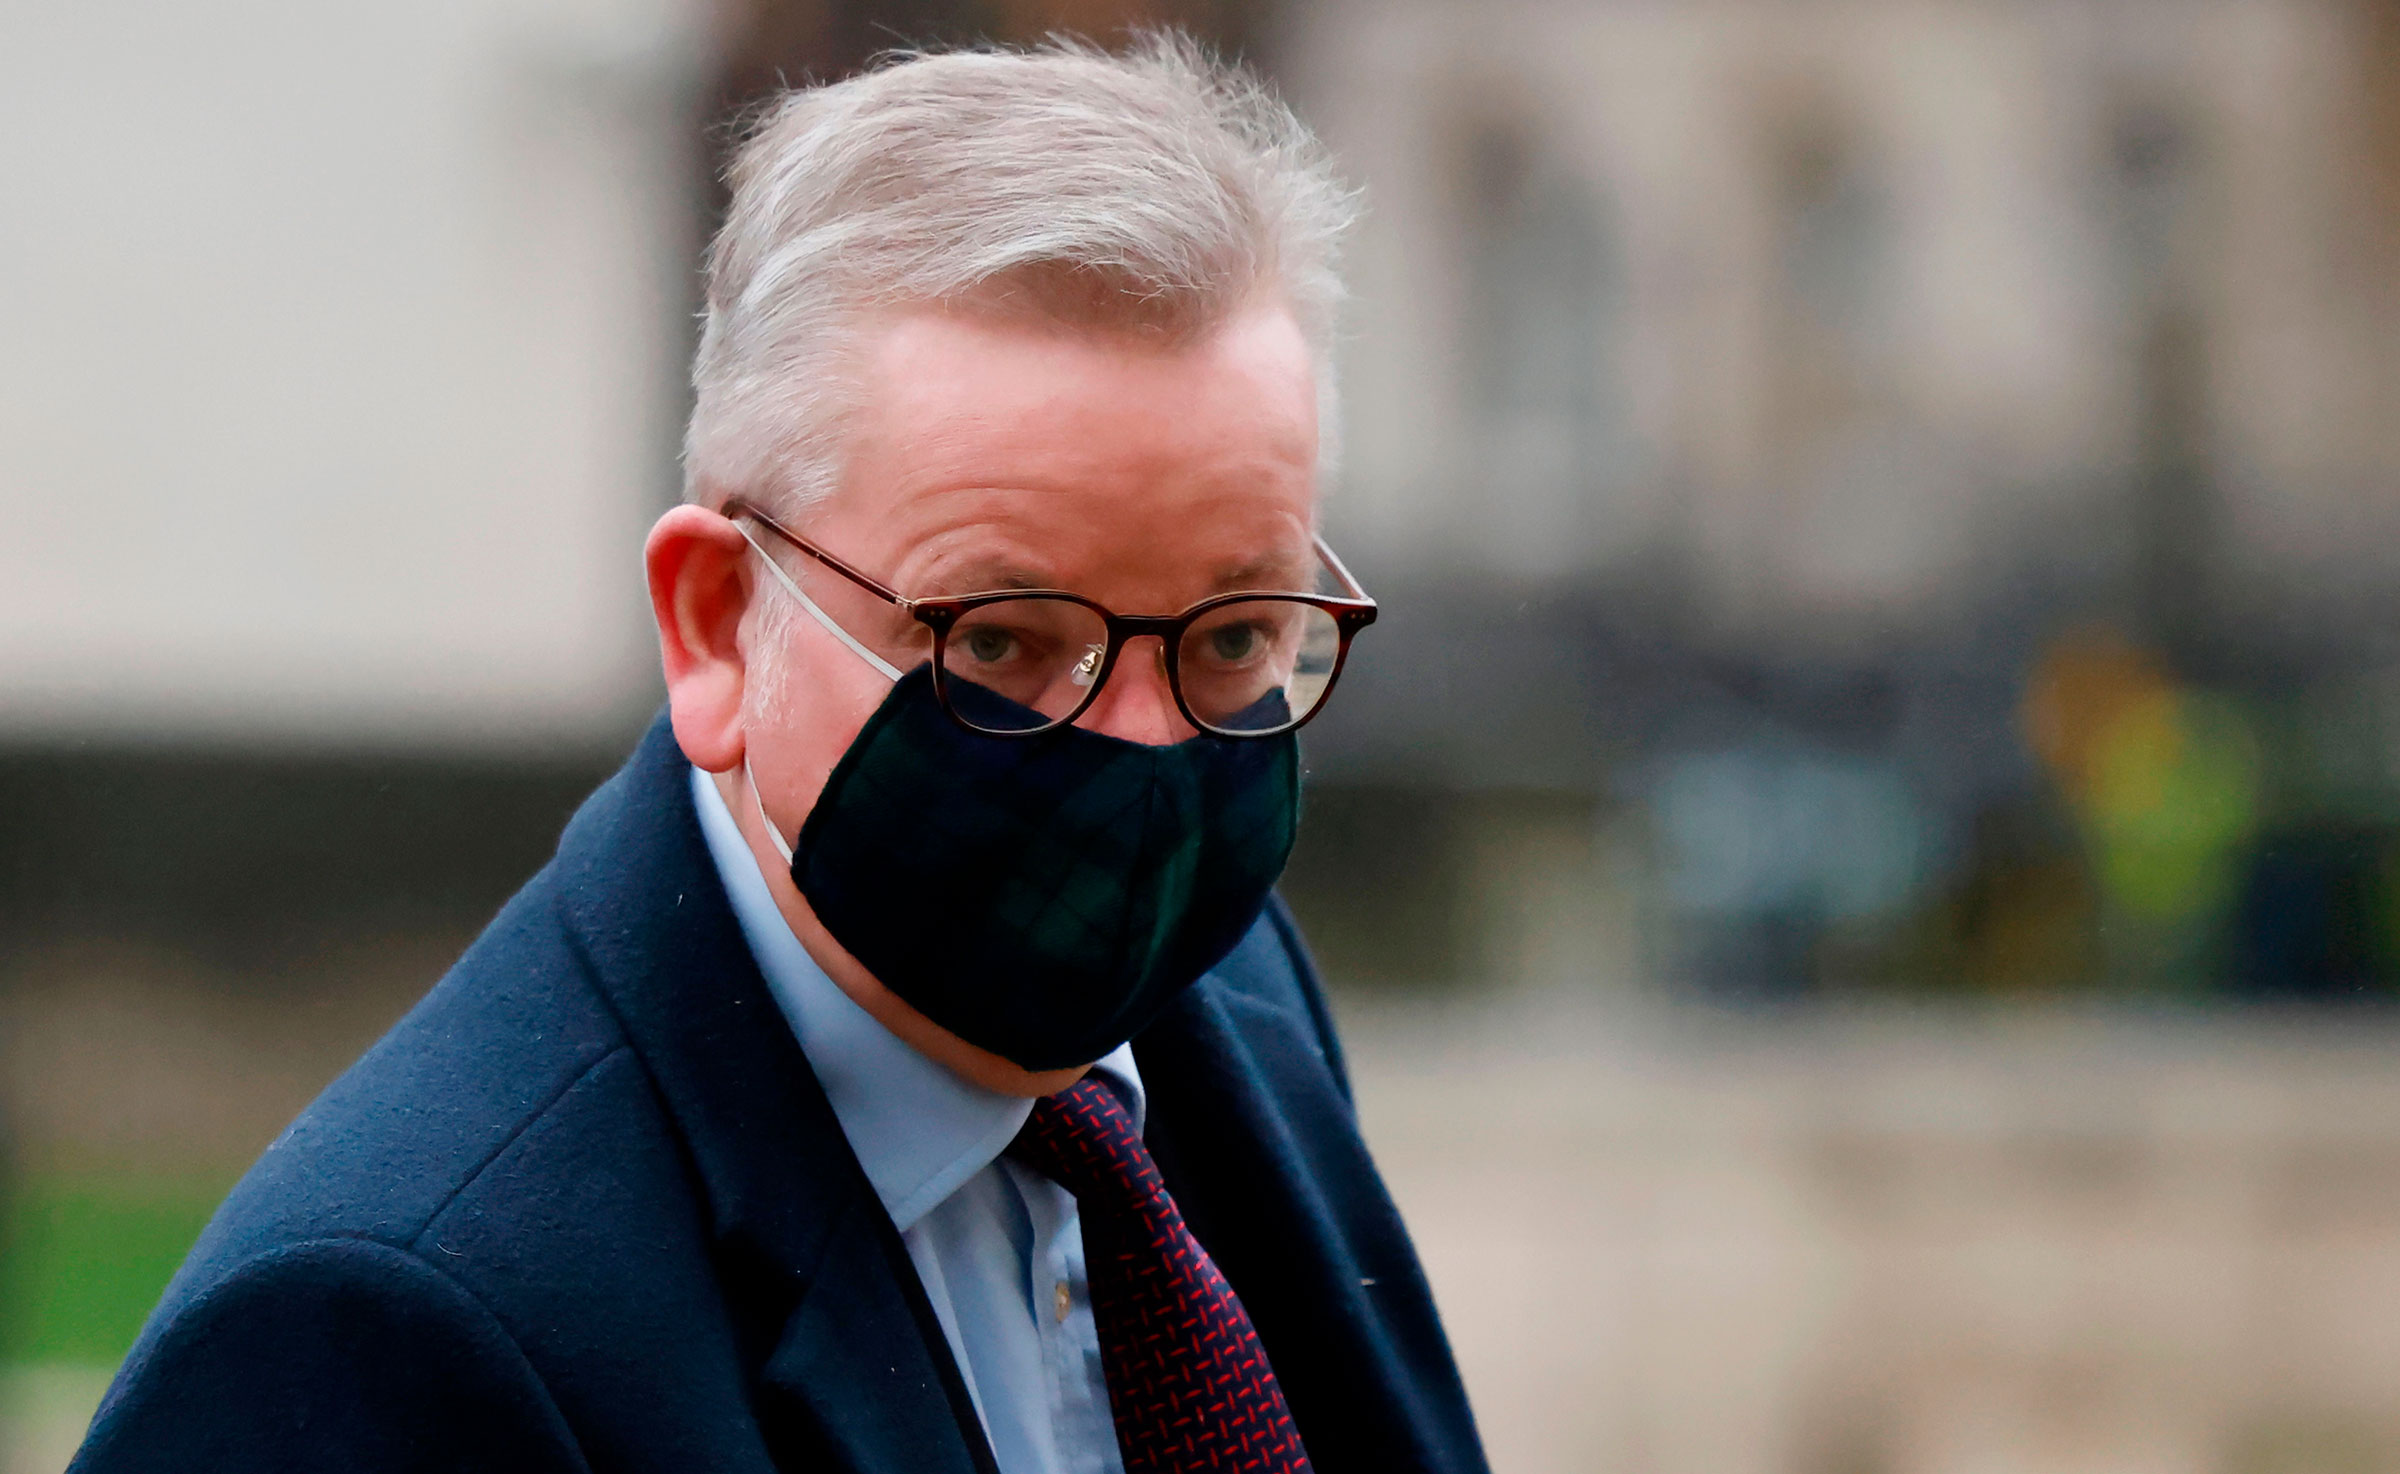 Cabinet Office Minister Michael Gove arrives at the Cabinet Office on December 21 in London.